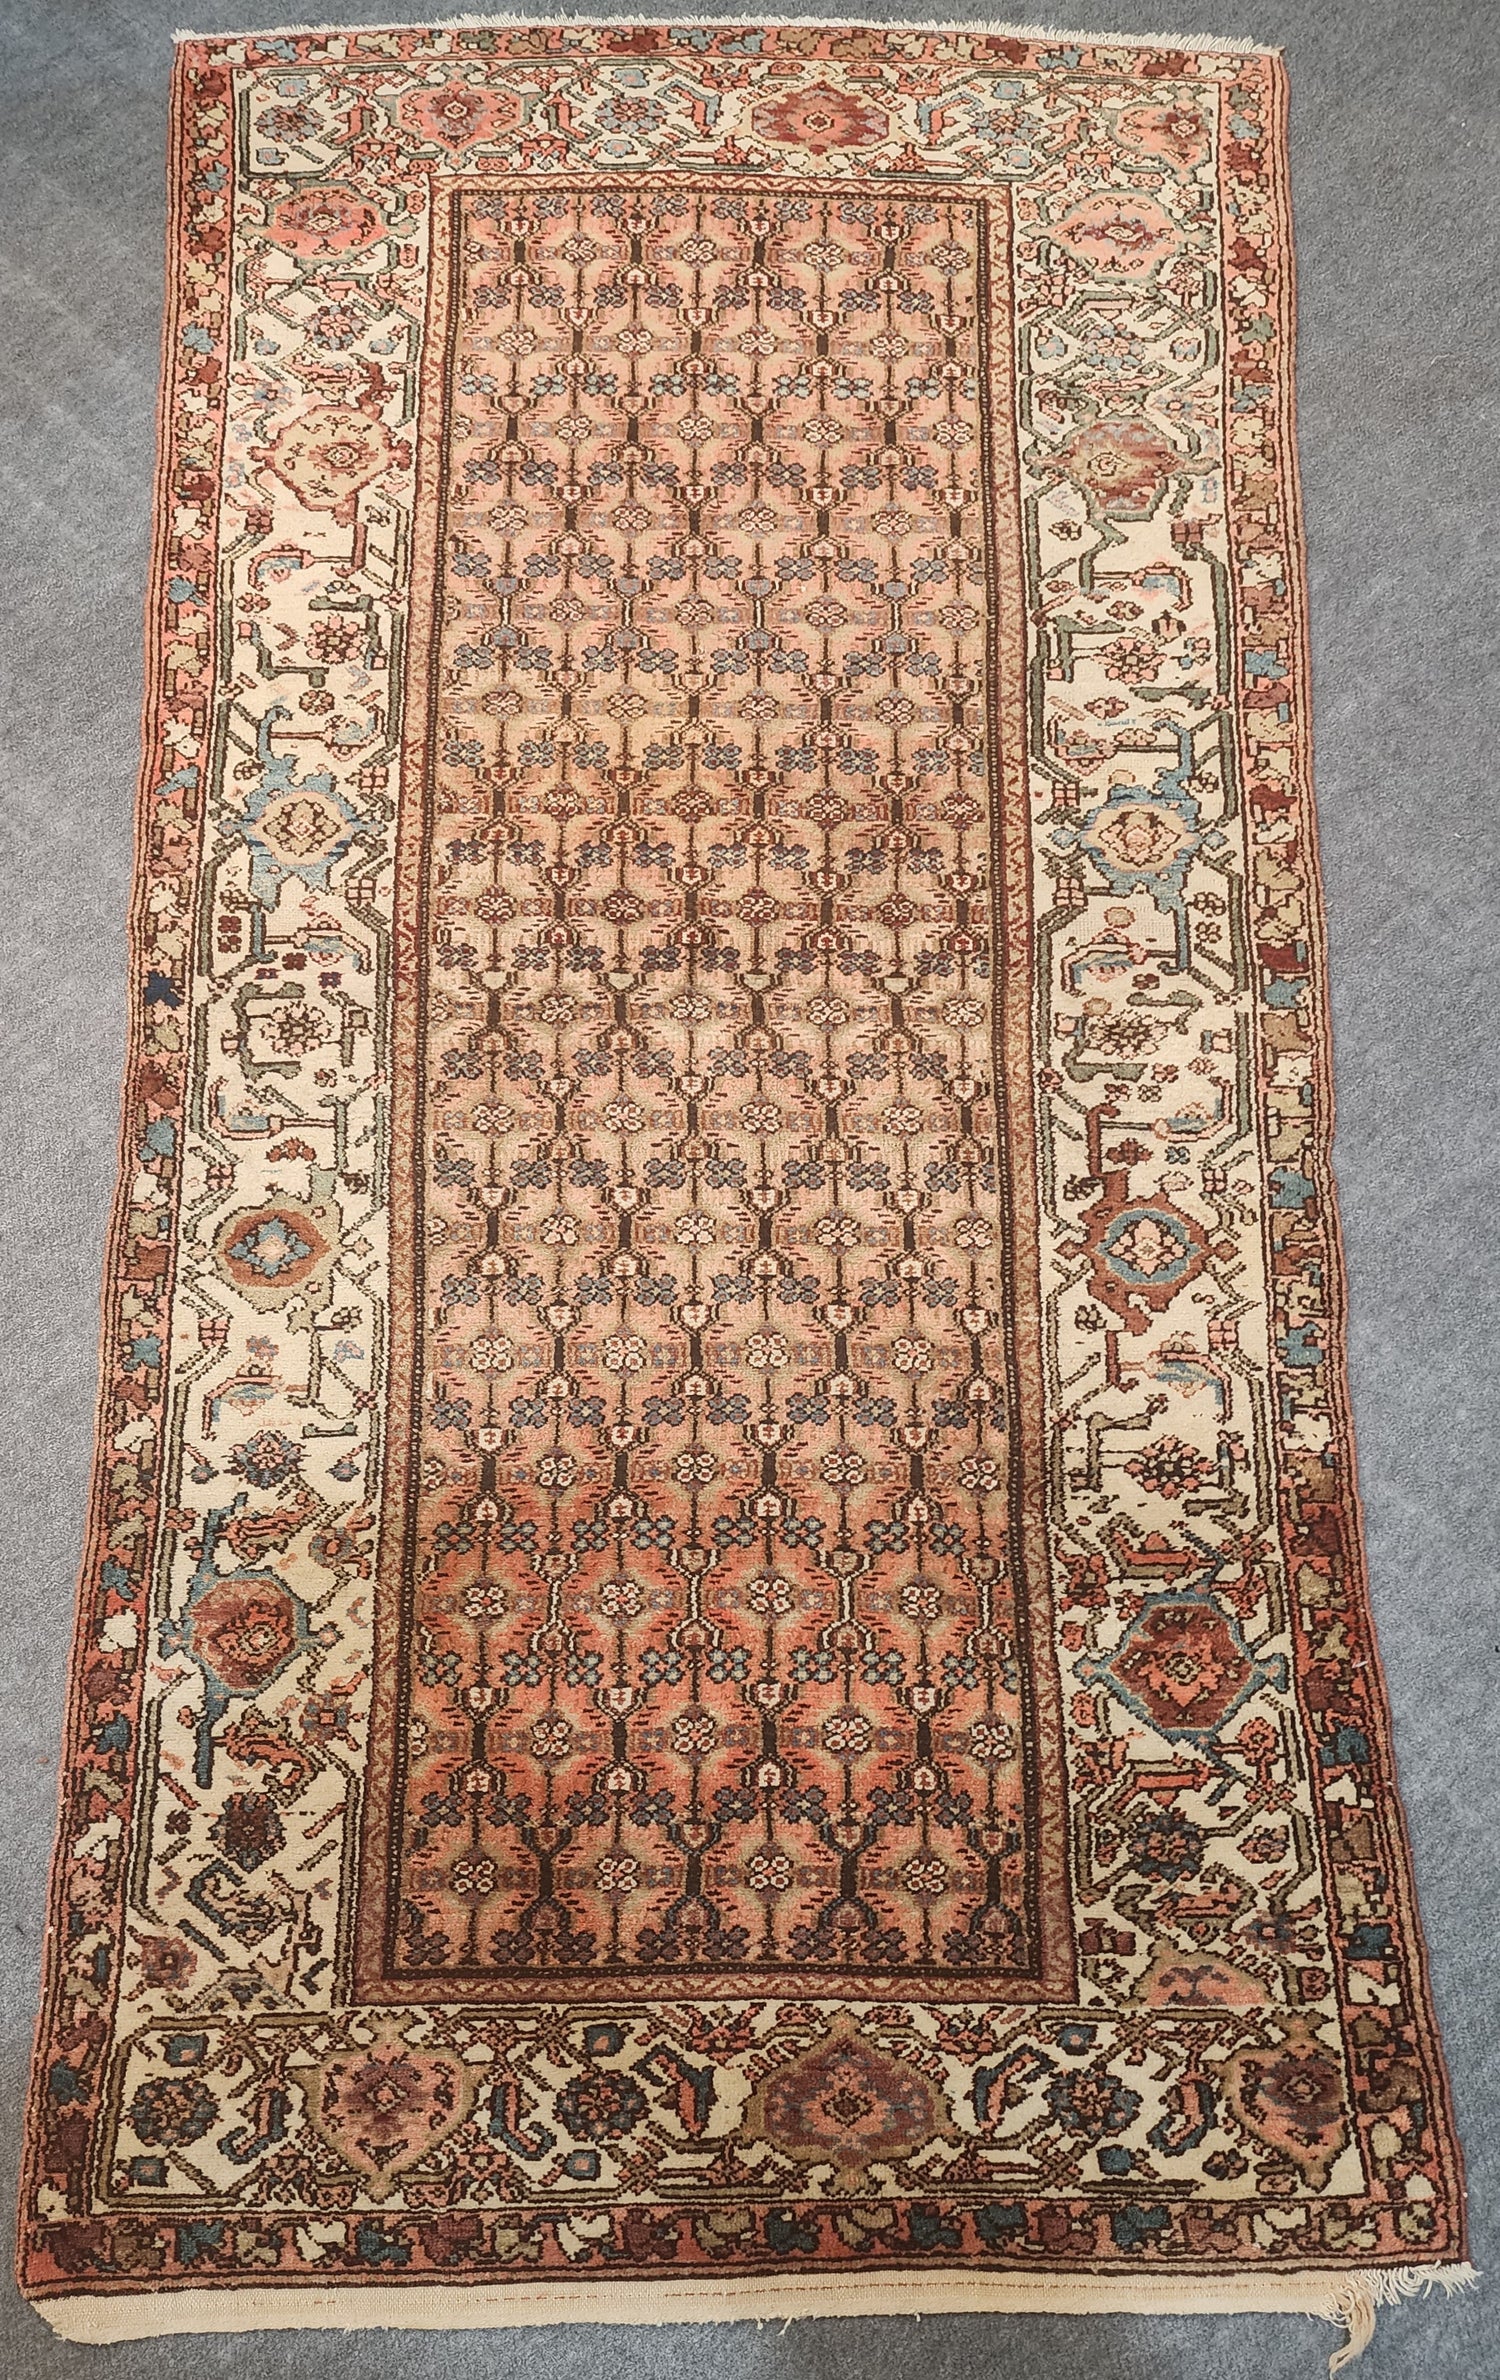 Private Collectors Rugs